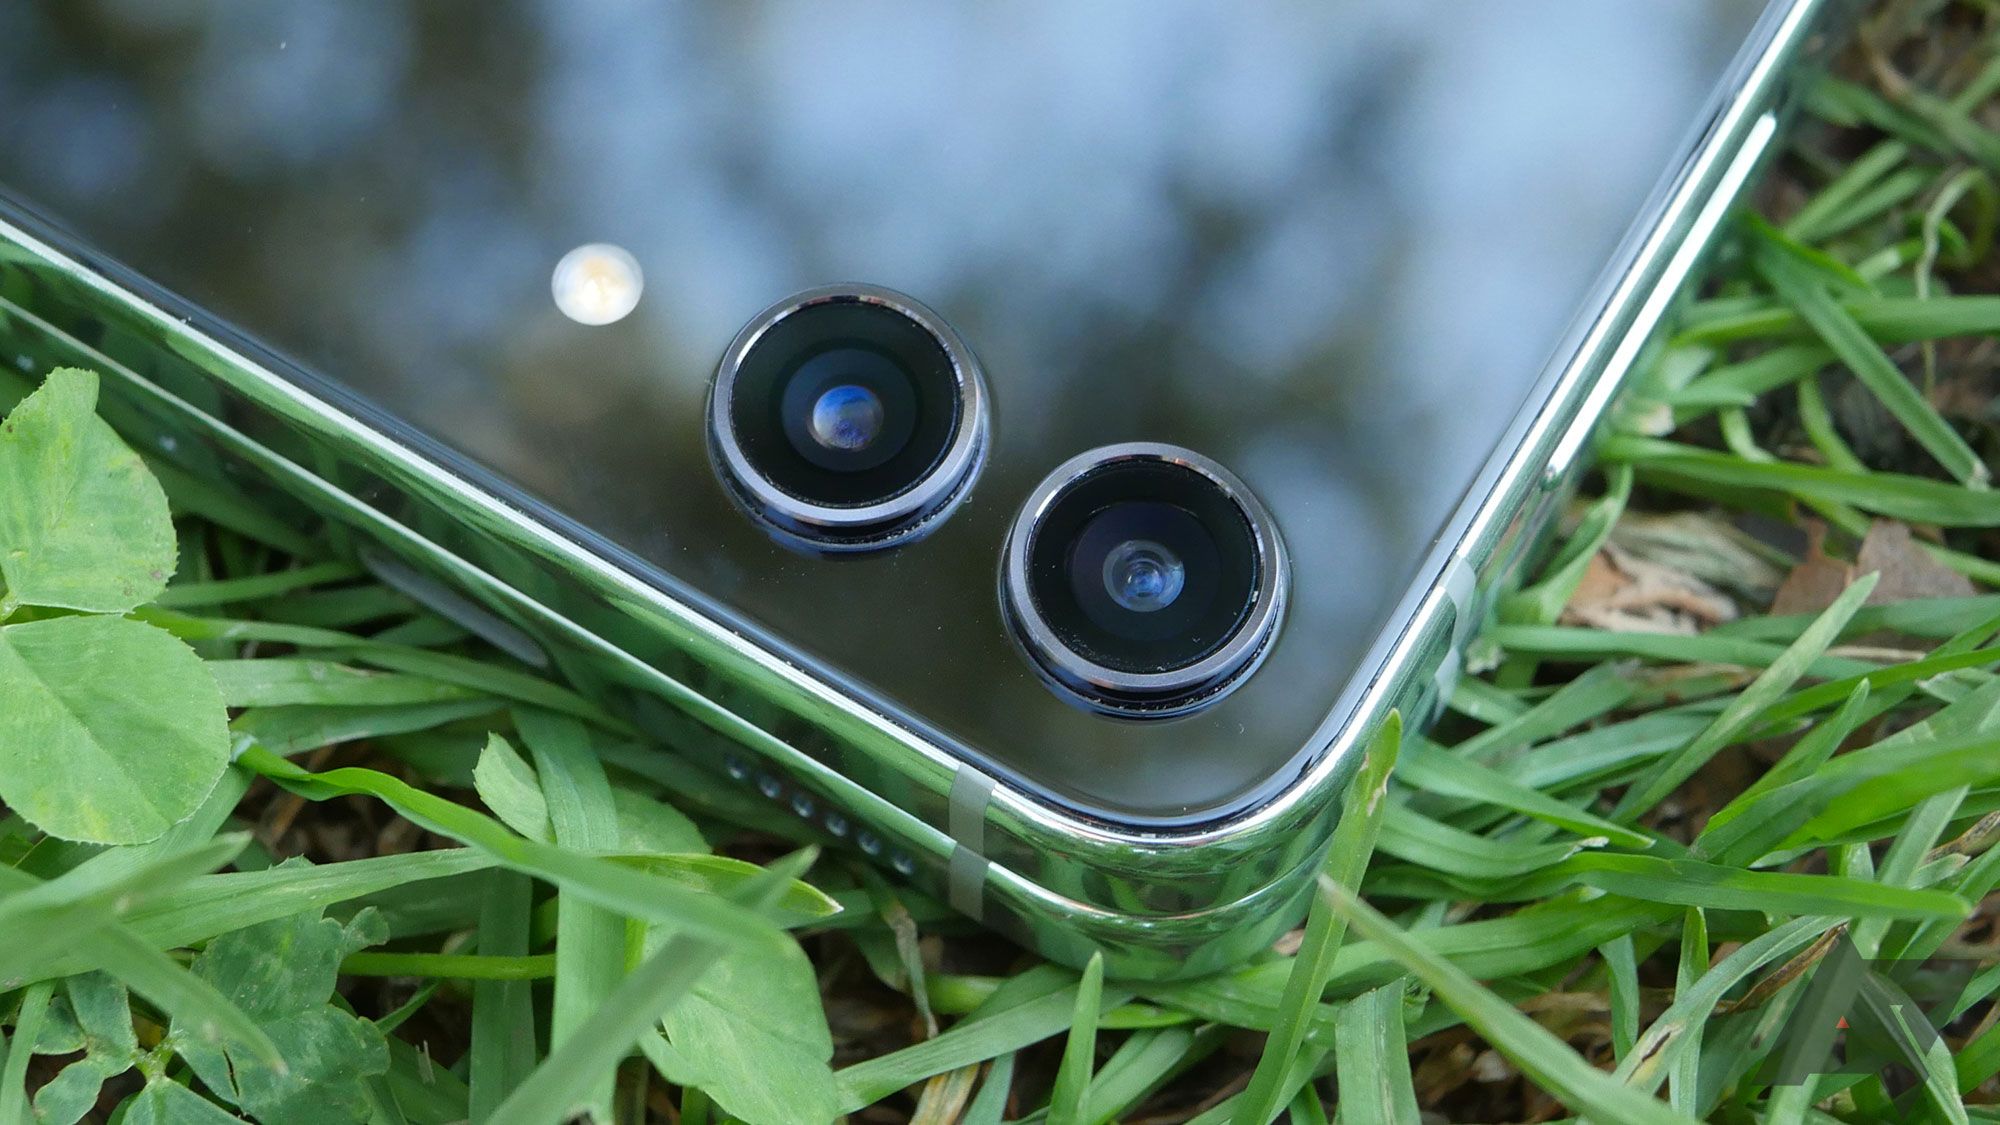 A Samsung Z Flip 5 with its external camera lenses visible sitting on some grass